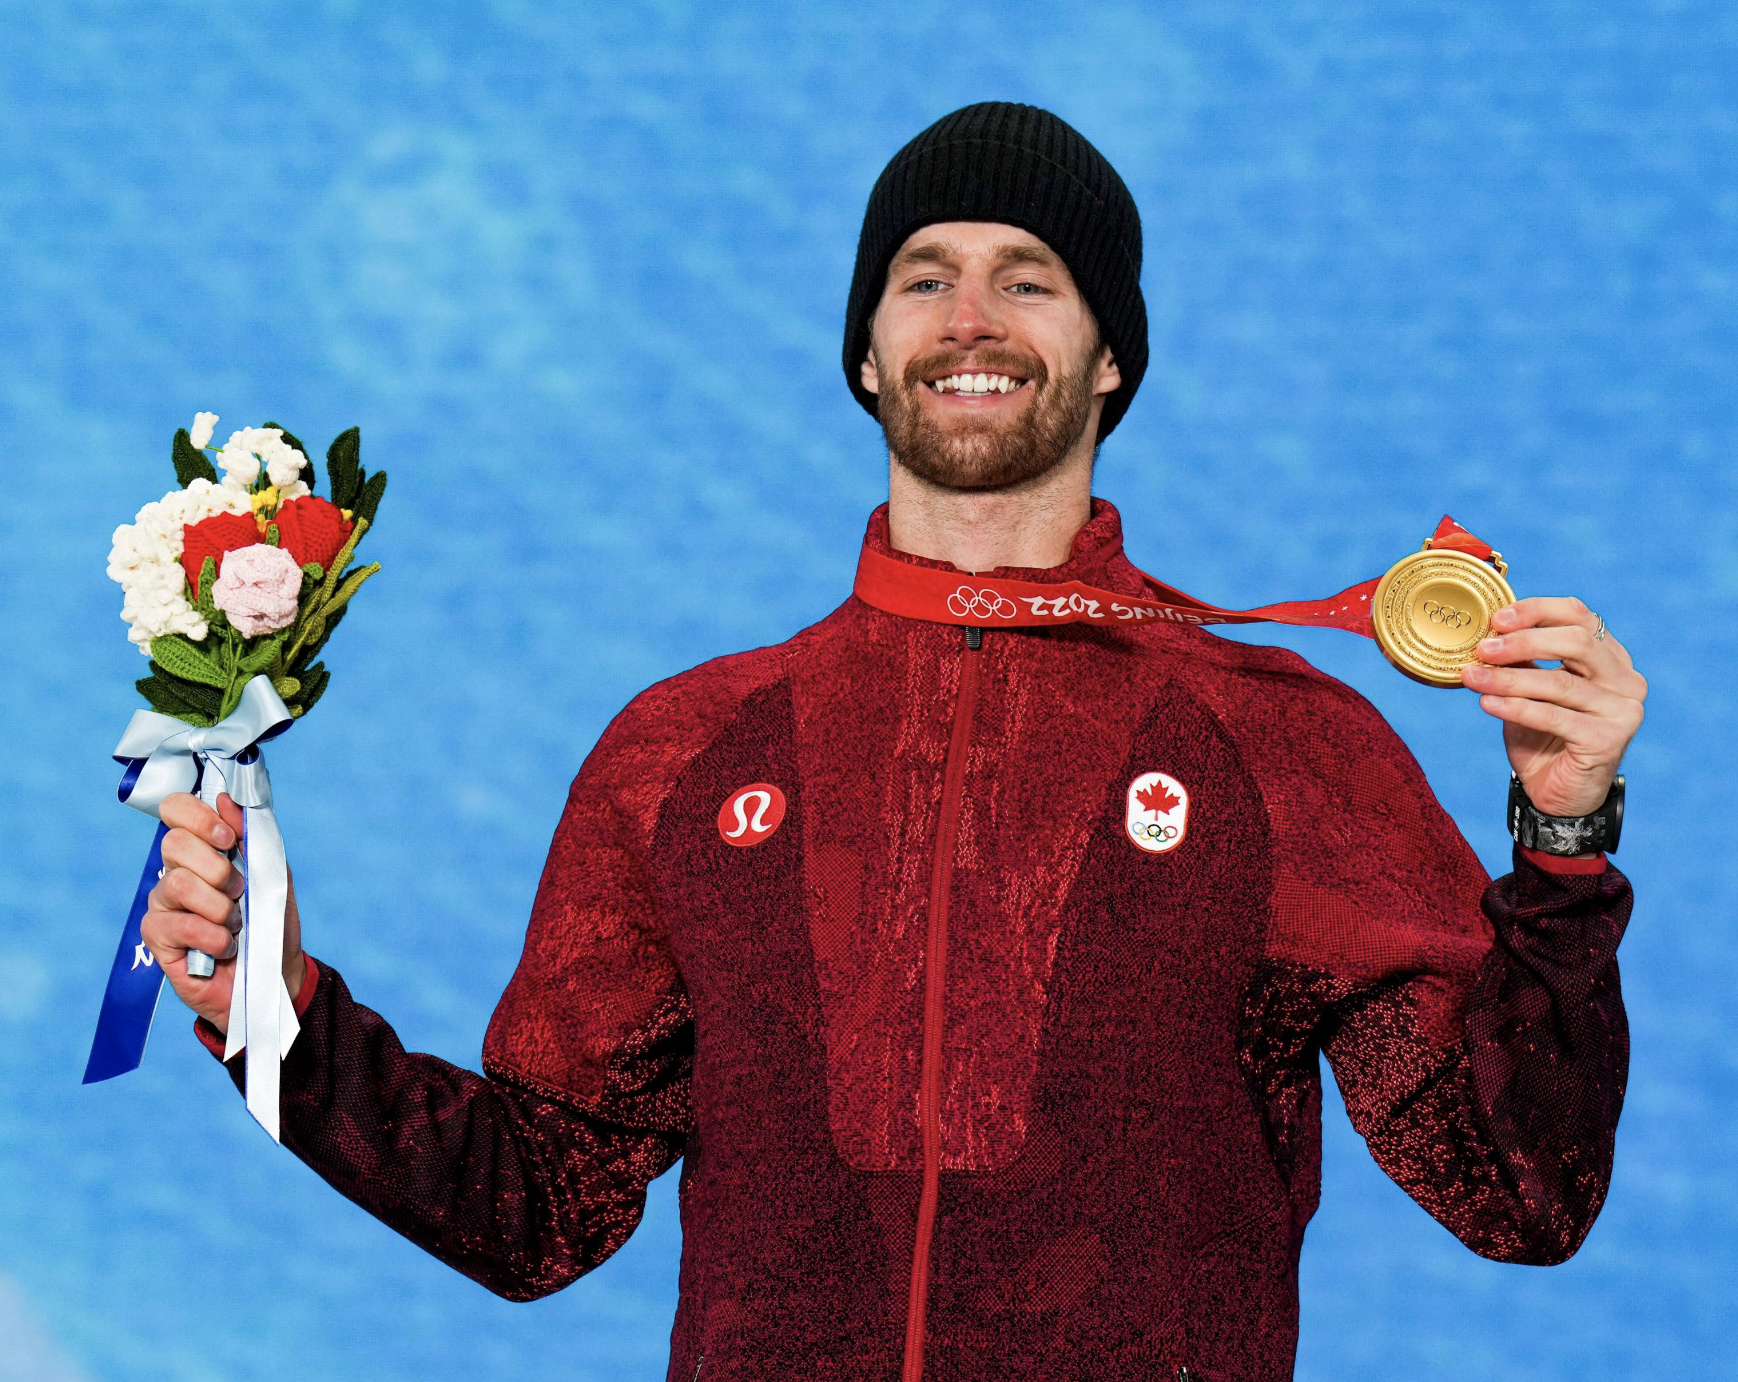 Snowboarder Max Parrot wins Canada’s first gold at Beijing Winter Olympic